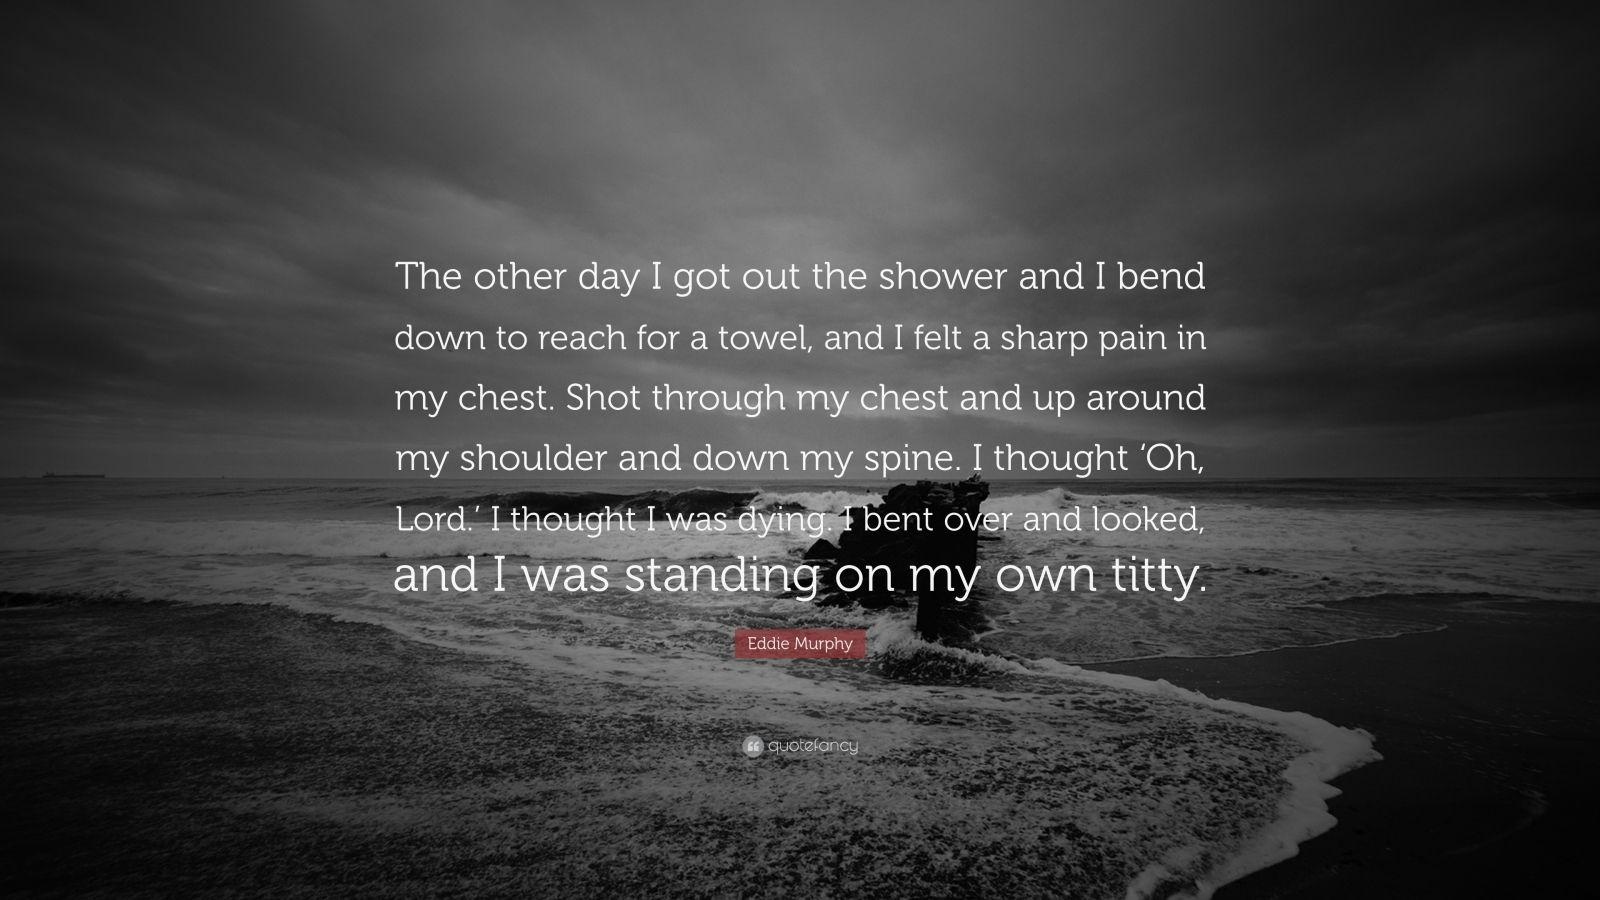 Eddie Murphy Quote: “The other day I got out the shower and I bend